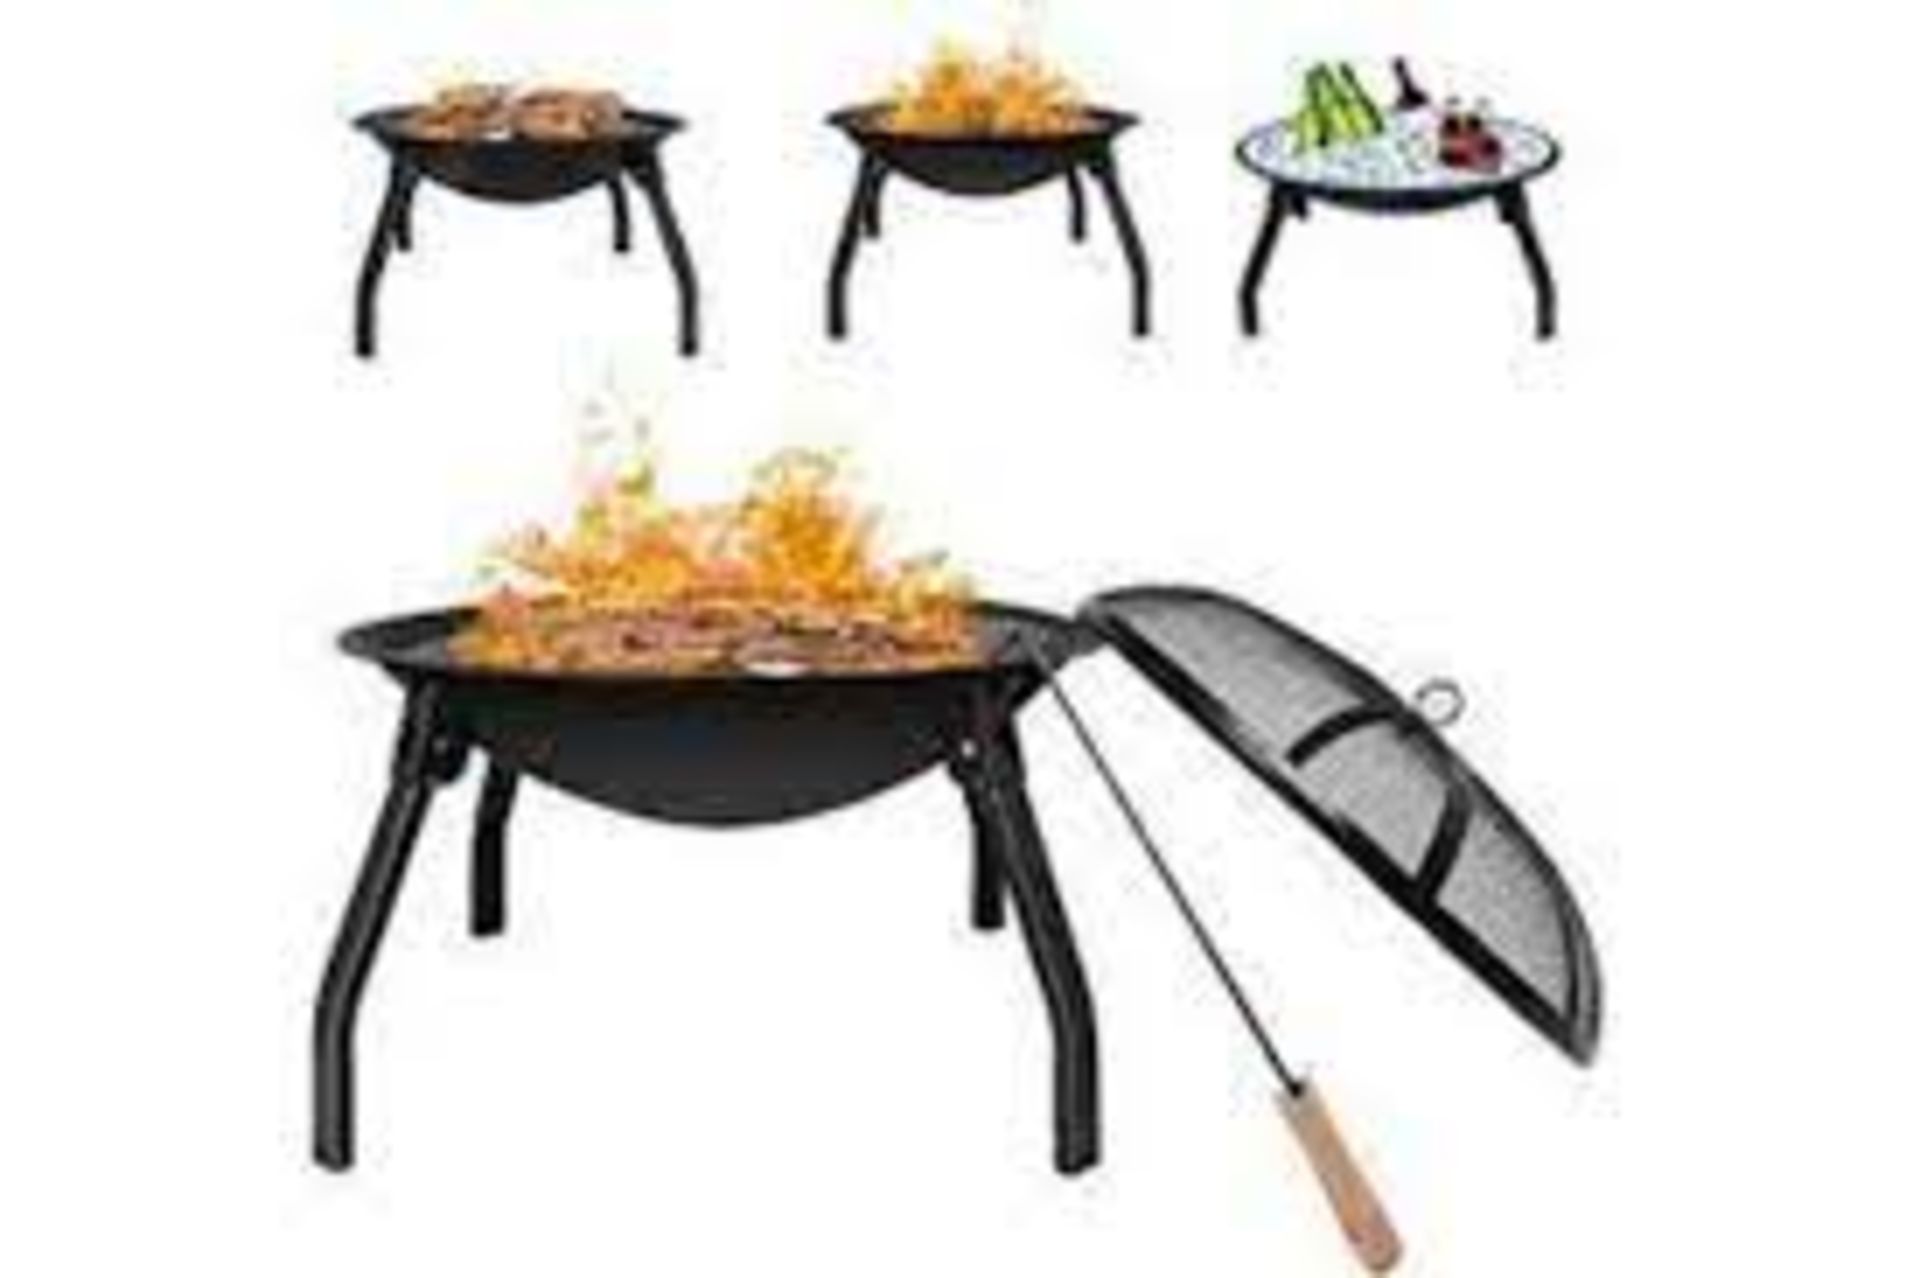 New Boxed Portable Folding Fire Pit BBQ 4 Leg Fire bowl Cooking Campfire. RRP £119.99. This